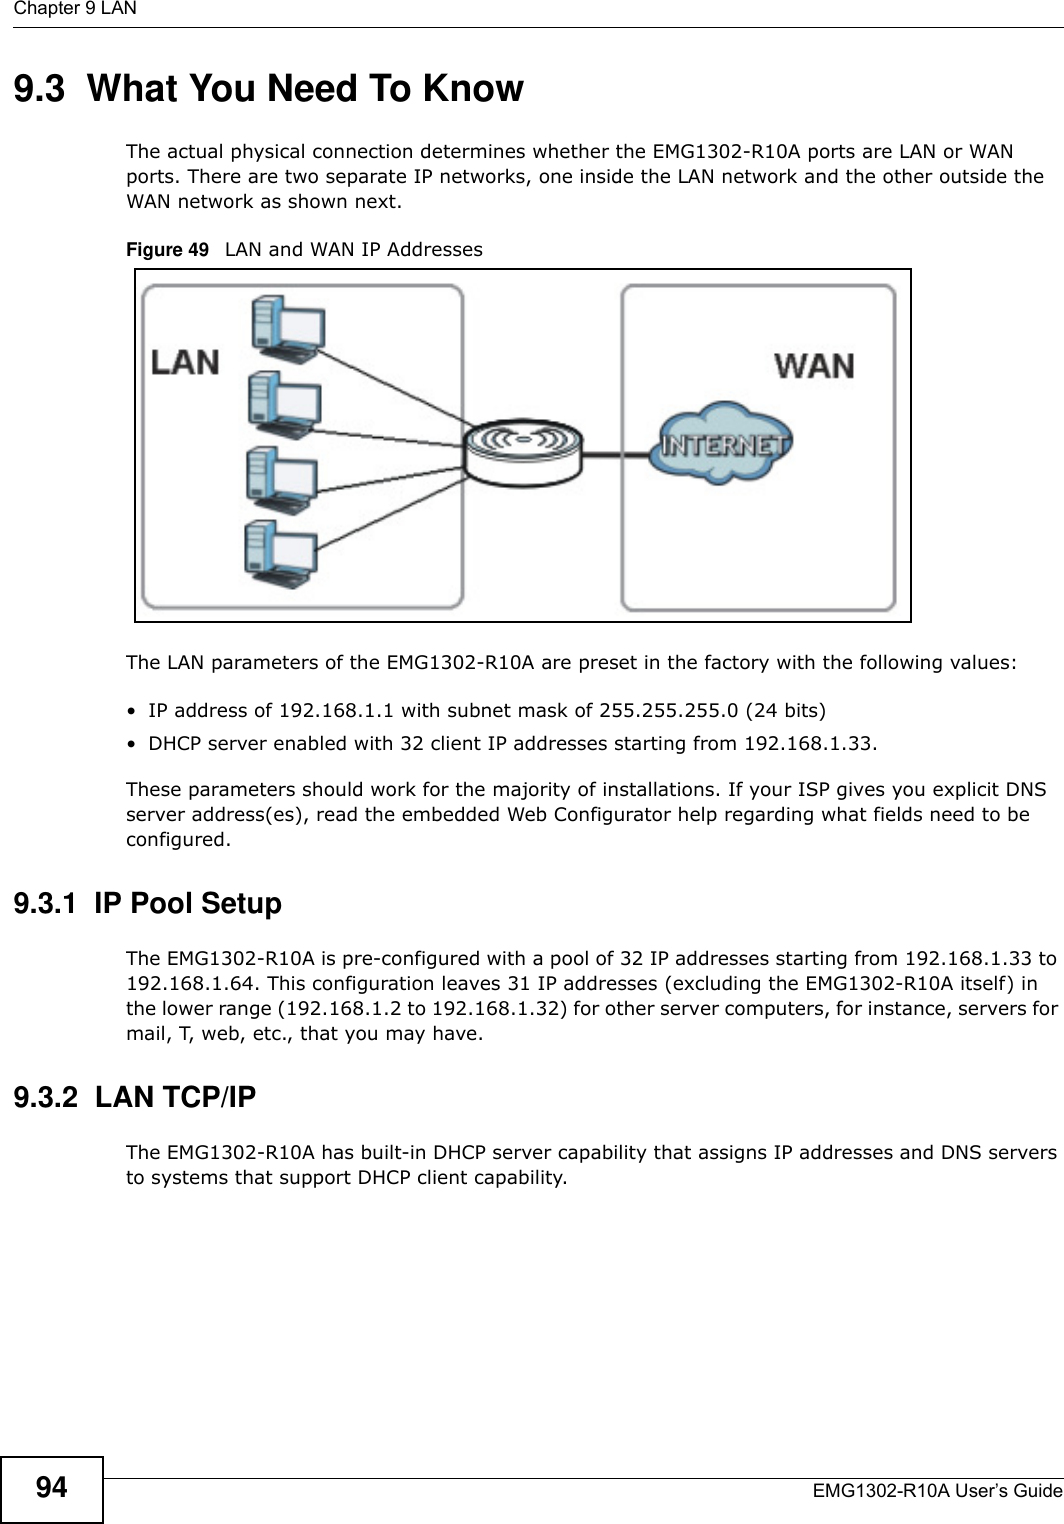 Chapter 9 LANEMG1302-R10A User’s Guide949.3  What You Need To KnowThe actual physical connection determines whether the EMG1302-R10A ports are LAN or WAN ports. There are two separate IP networks, one inside the LAN network and the other outside the WAN network as shown next.Figure 49   LAN and WAN IP AddressesThe LAN parameters of the EMG1302-R10A are preset in the factory with the following values:• IP address of 192.168.1.1 with subnet mask of 255.255.255.0 (24 bits)• DHCP server enabled with 32 client IP addresses starting from 192.168.1.33. These parameters should work for the majority of installations. If your ISP gives you explicit DNS server address(es), read the embedded Web Configurator help regarding what fields need to be configured.9.3.1  IP Pool SetupThe EMG1302-R10A is pre-configured with a pool of 32 IP addresses starting from 192.168.1.33 to 192.168.1.64. This configuration leaves 31 IP addresses (excluding the EMG1302-R10A itself) in the lower range (192.168.1.2 to 192.168.1.32) for other server computers, for instance, servers for mail, T, web, etc., that you may have.9.3.2  LAN TCP/IP The EMG1302-R10A has built-in DHCP server capability that assigns IP addresses and DNS servers to systems that support DHCP client capability.